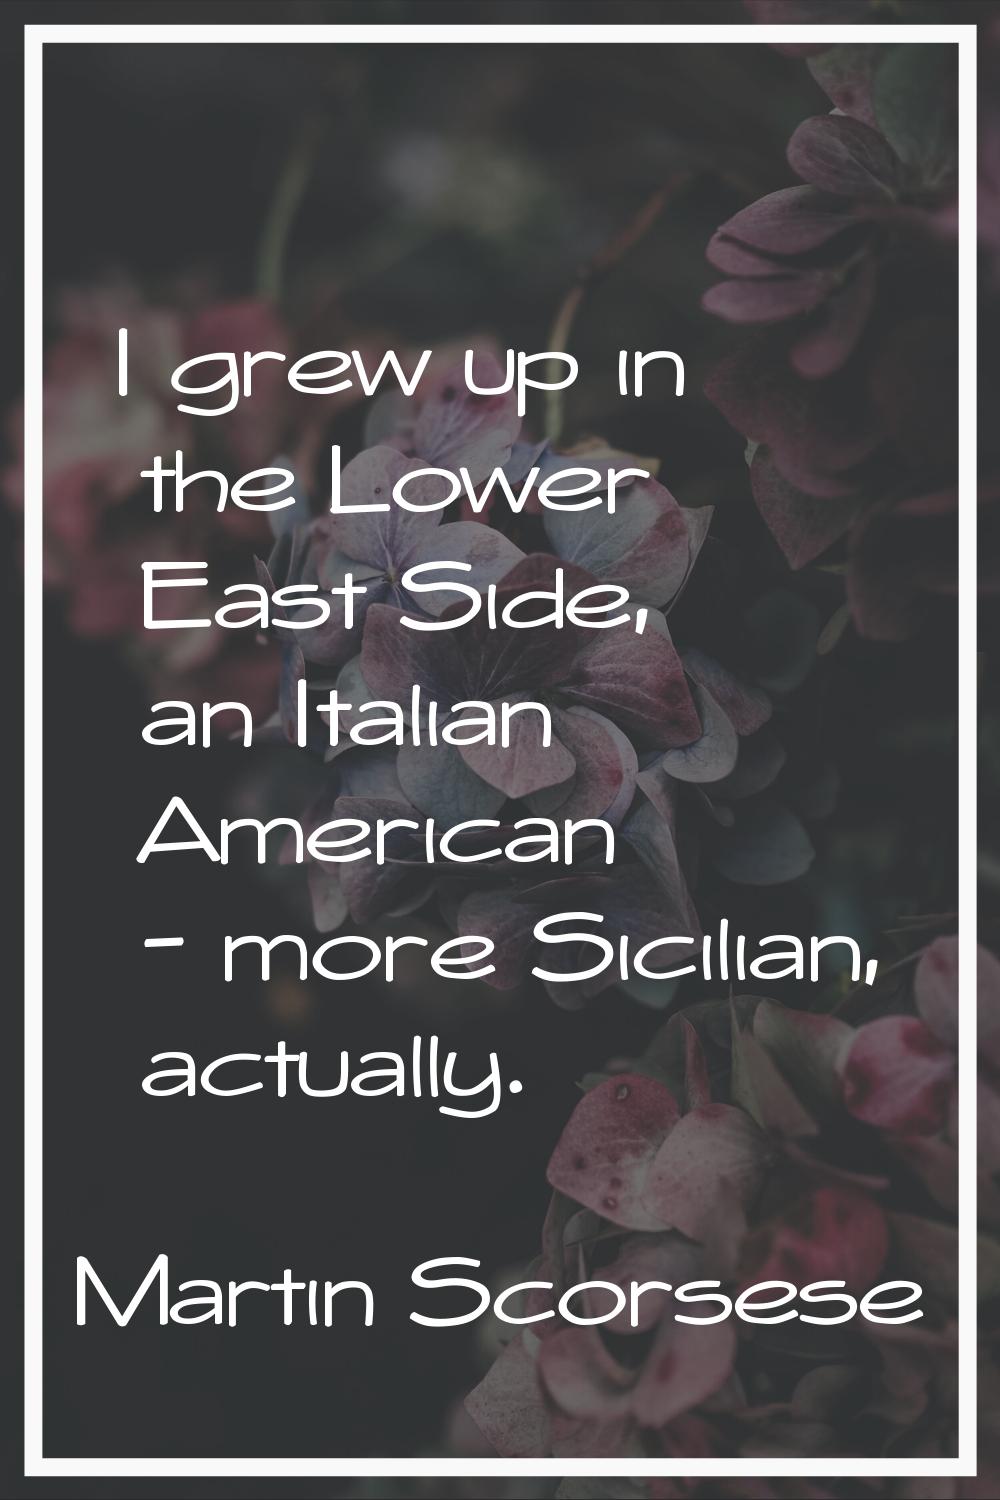 I grew up in the Lower East Side, an Italian American - more Sicilian, actually.